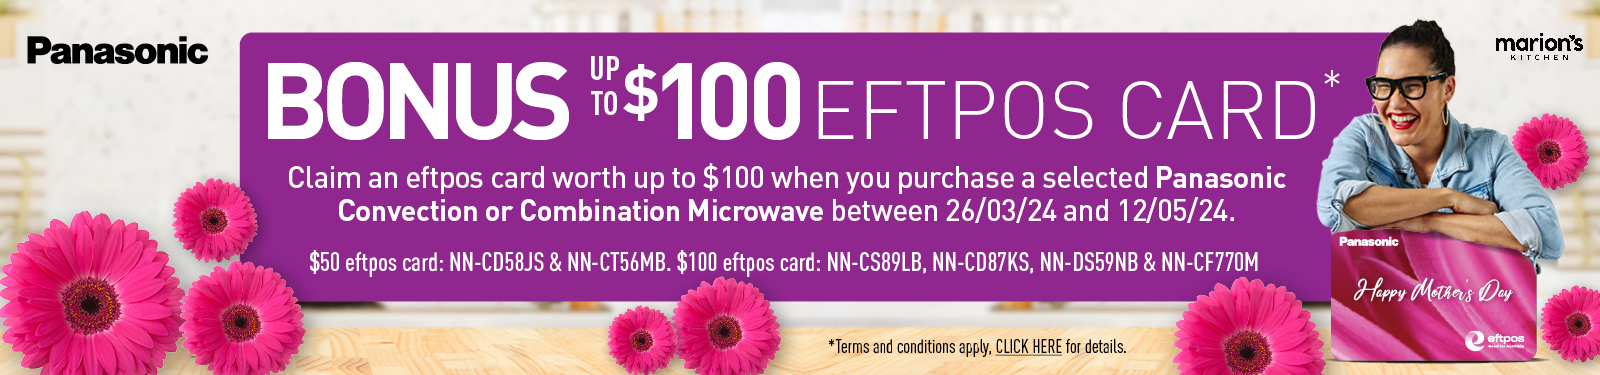 Panasonic Mother's Day Microwave Cashback at Retravision